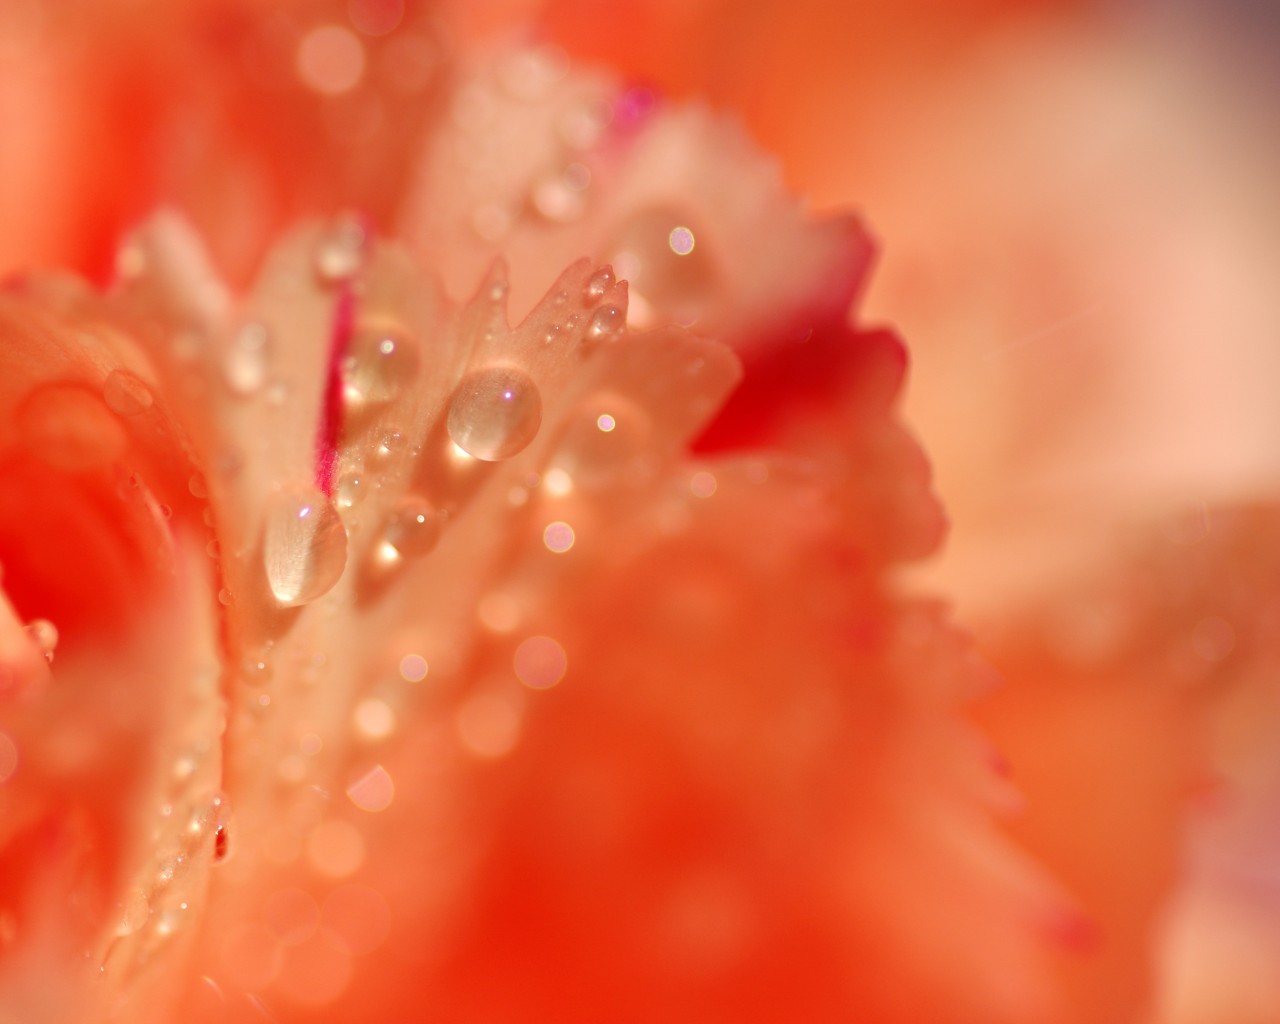 orange background with orange and pink flower petals and water